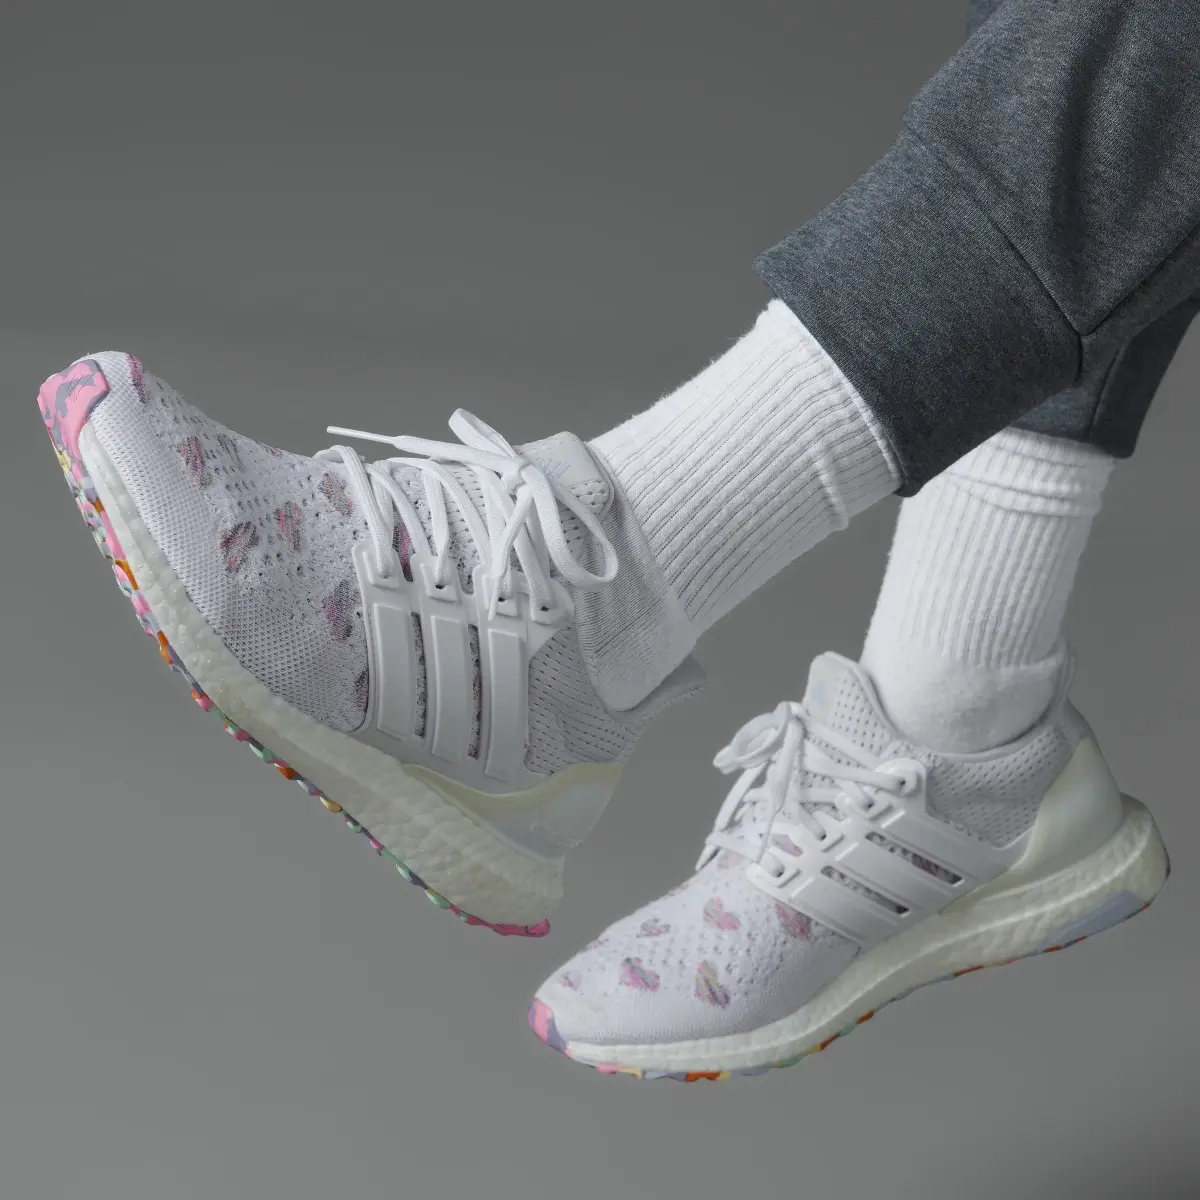 Adidas Valentine's Day Ultraboost 1.0 Shoes. 2